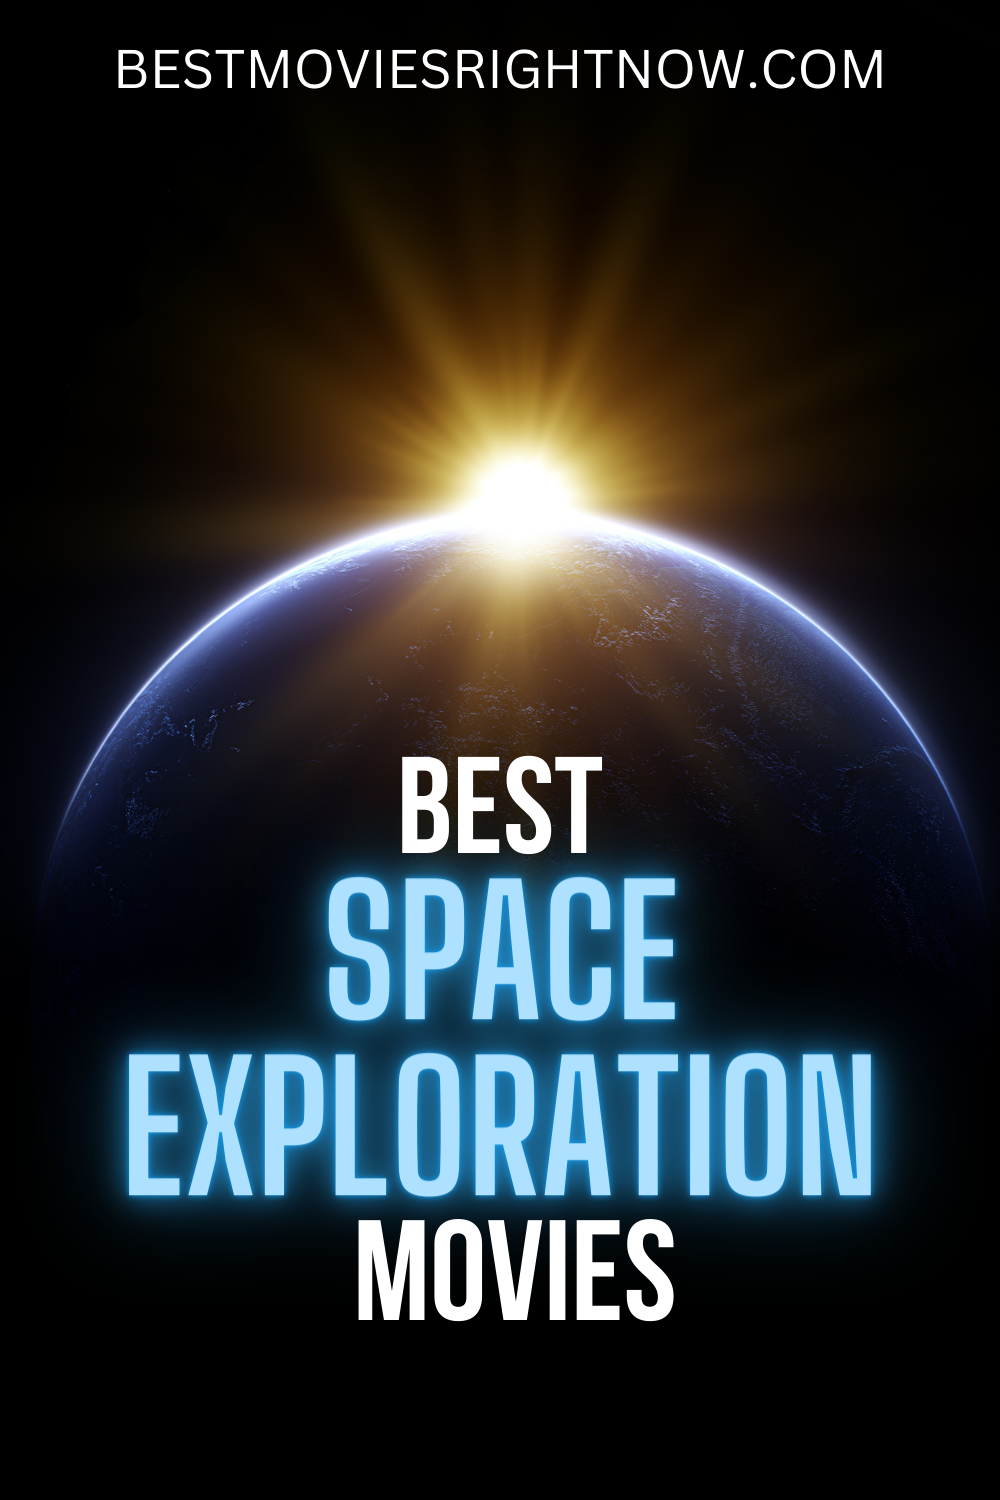 an image of a planet and sun with a caption "best space exploration movies"